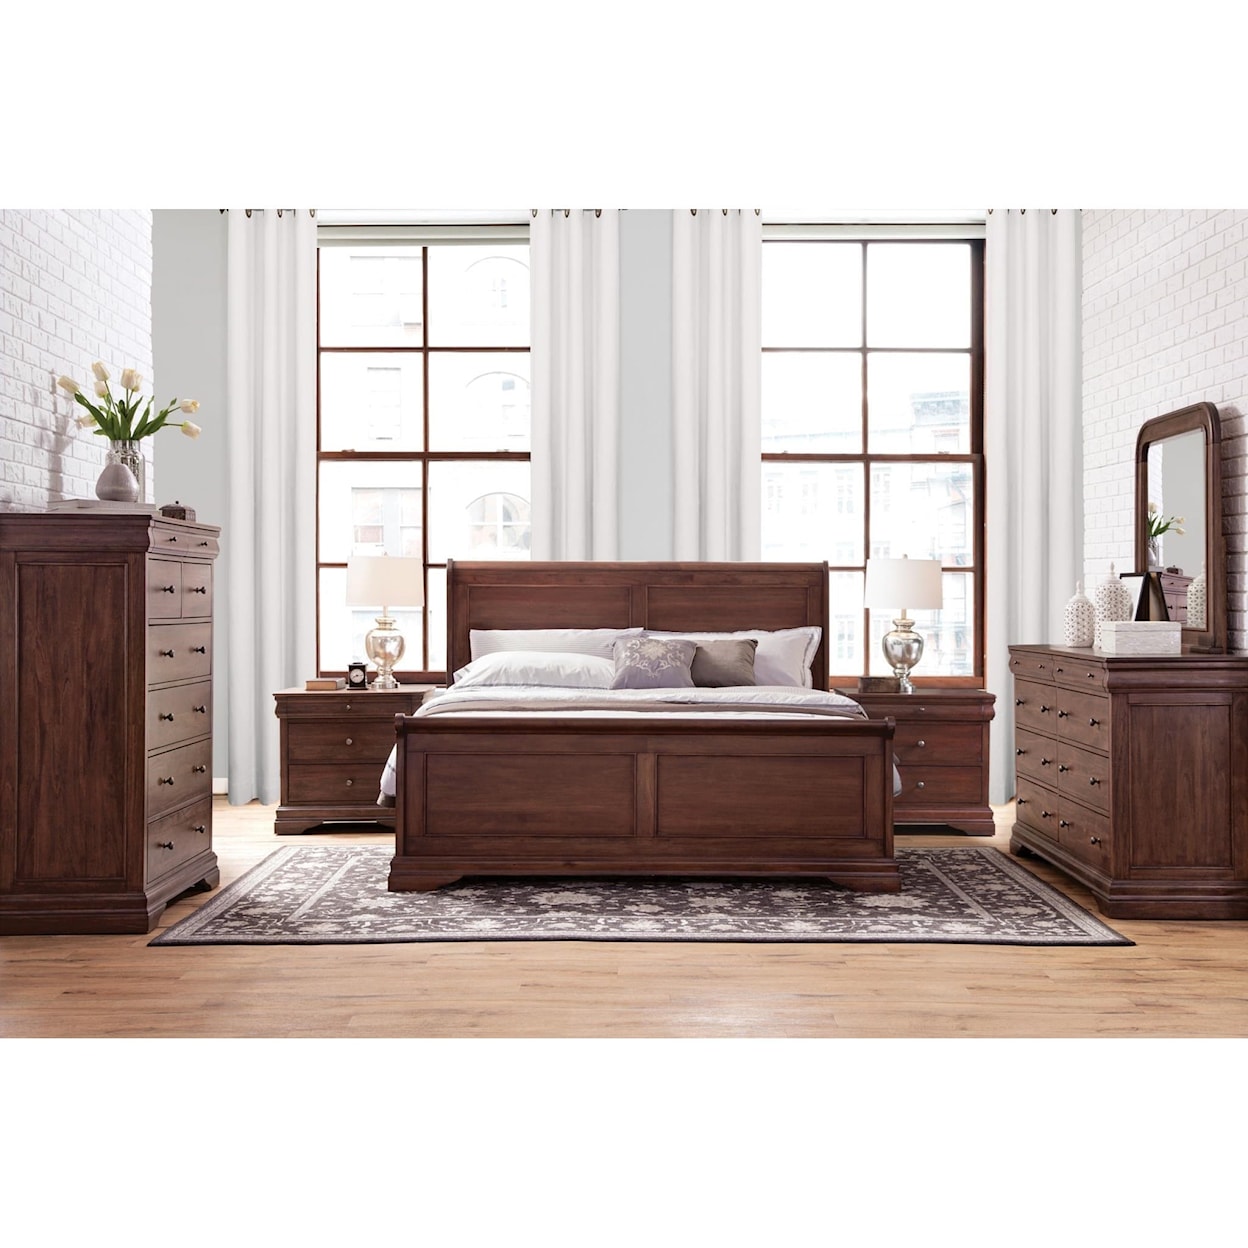 Napa Furniture Design French Classic Queen Sleigh Bed